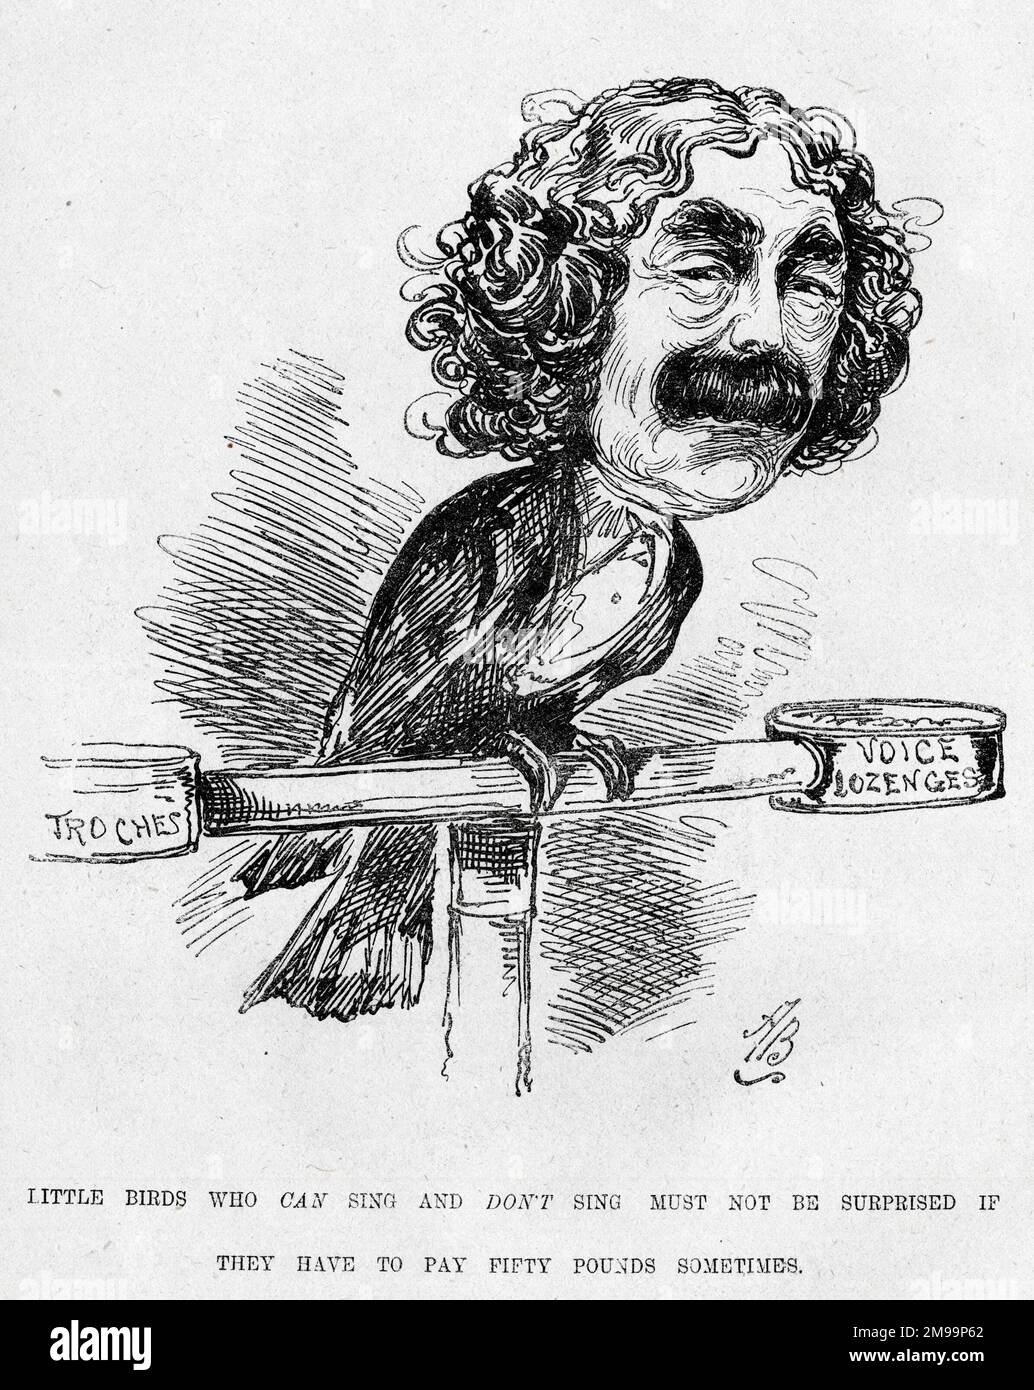 Cartoon, Little birds who can sing and don't sing must not be surprised if they have to pay fifty pounds sometimes. John Sims Reeves (1821-1900), operatic, oratorio and ballad singer, had been unable to perform because of a bad throat. Stock Photo